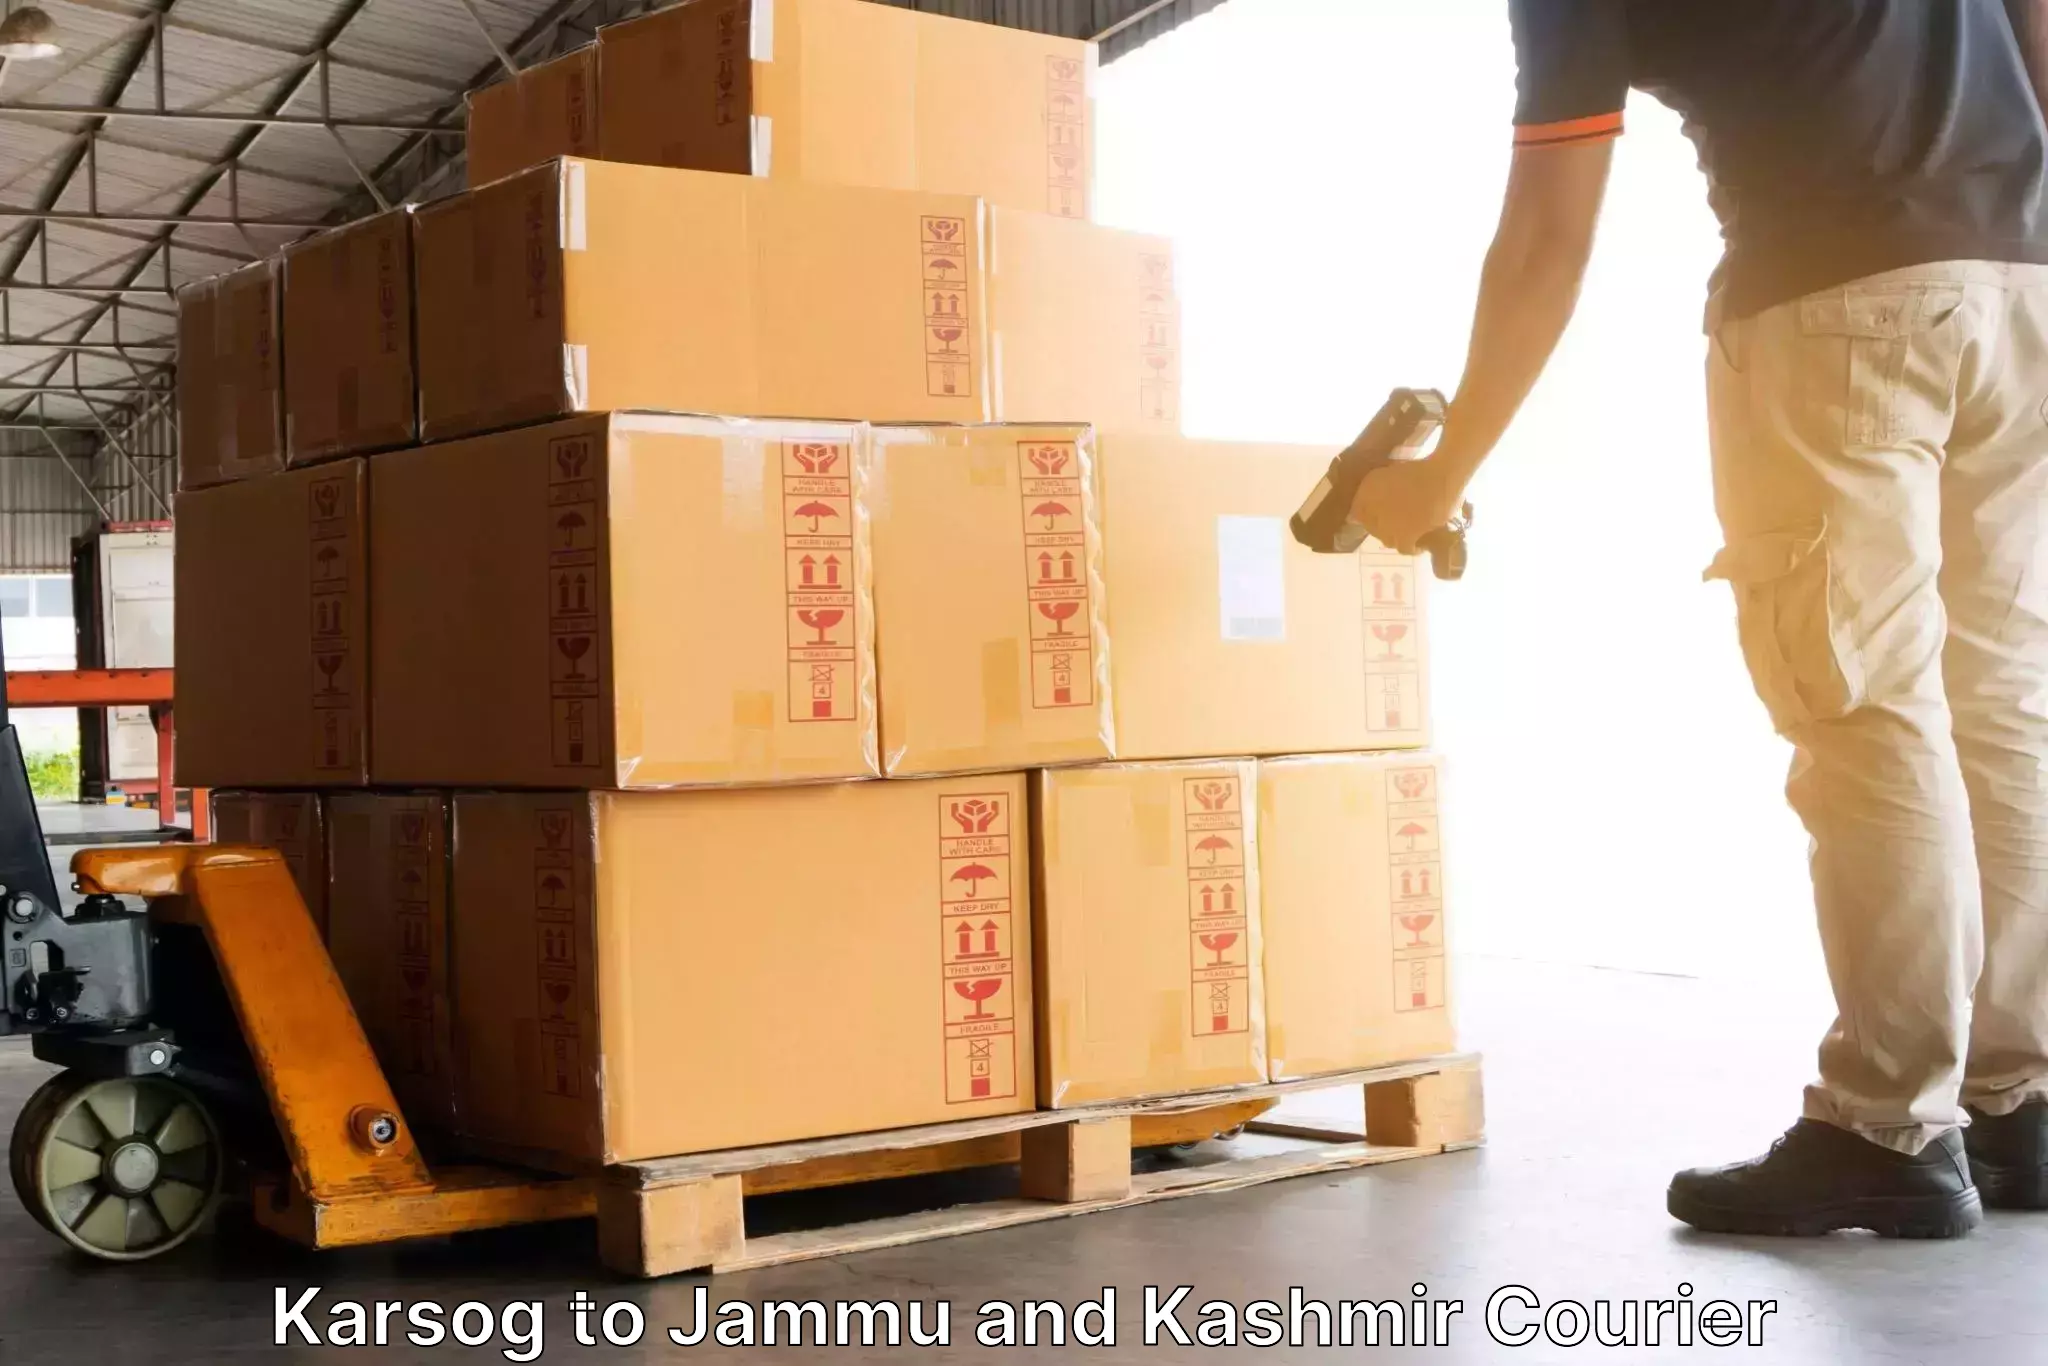 Courier service efficiency Karsog to Chenani